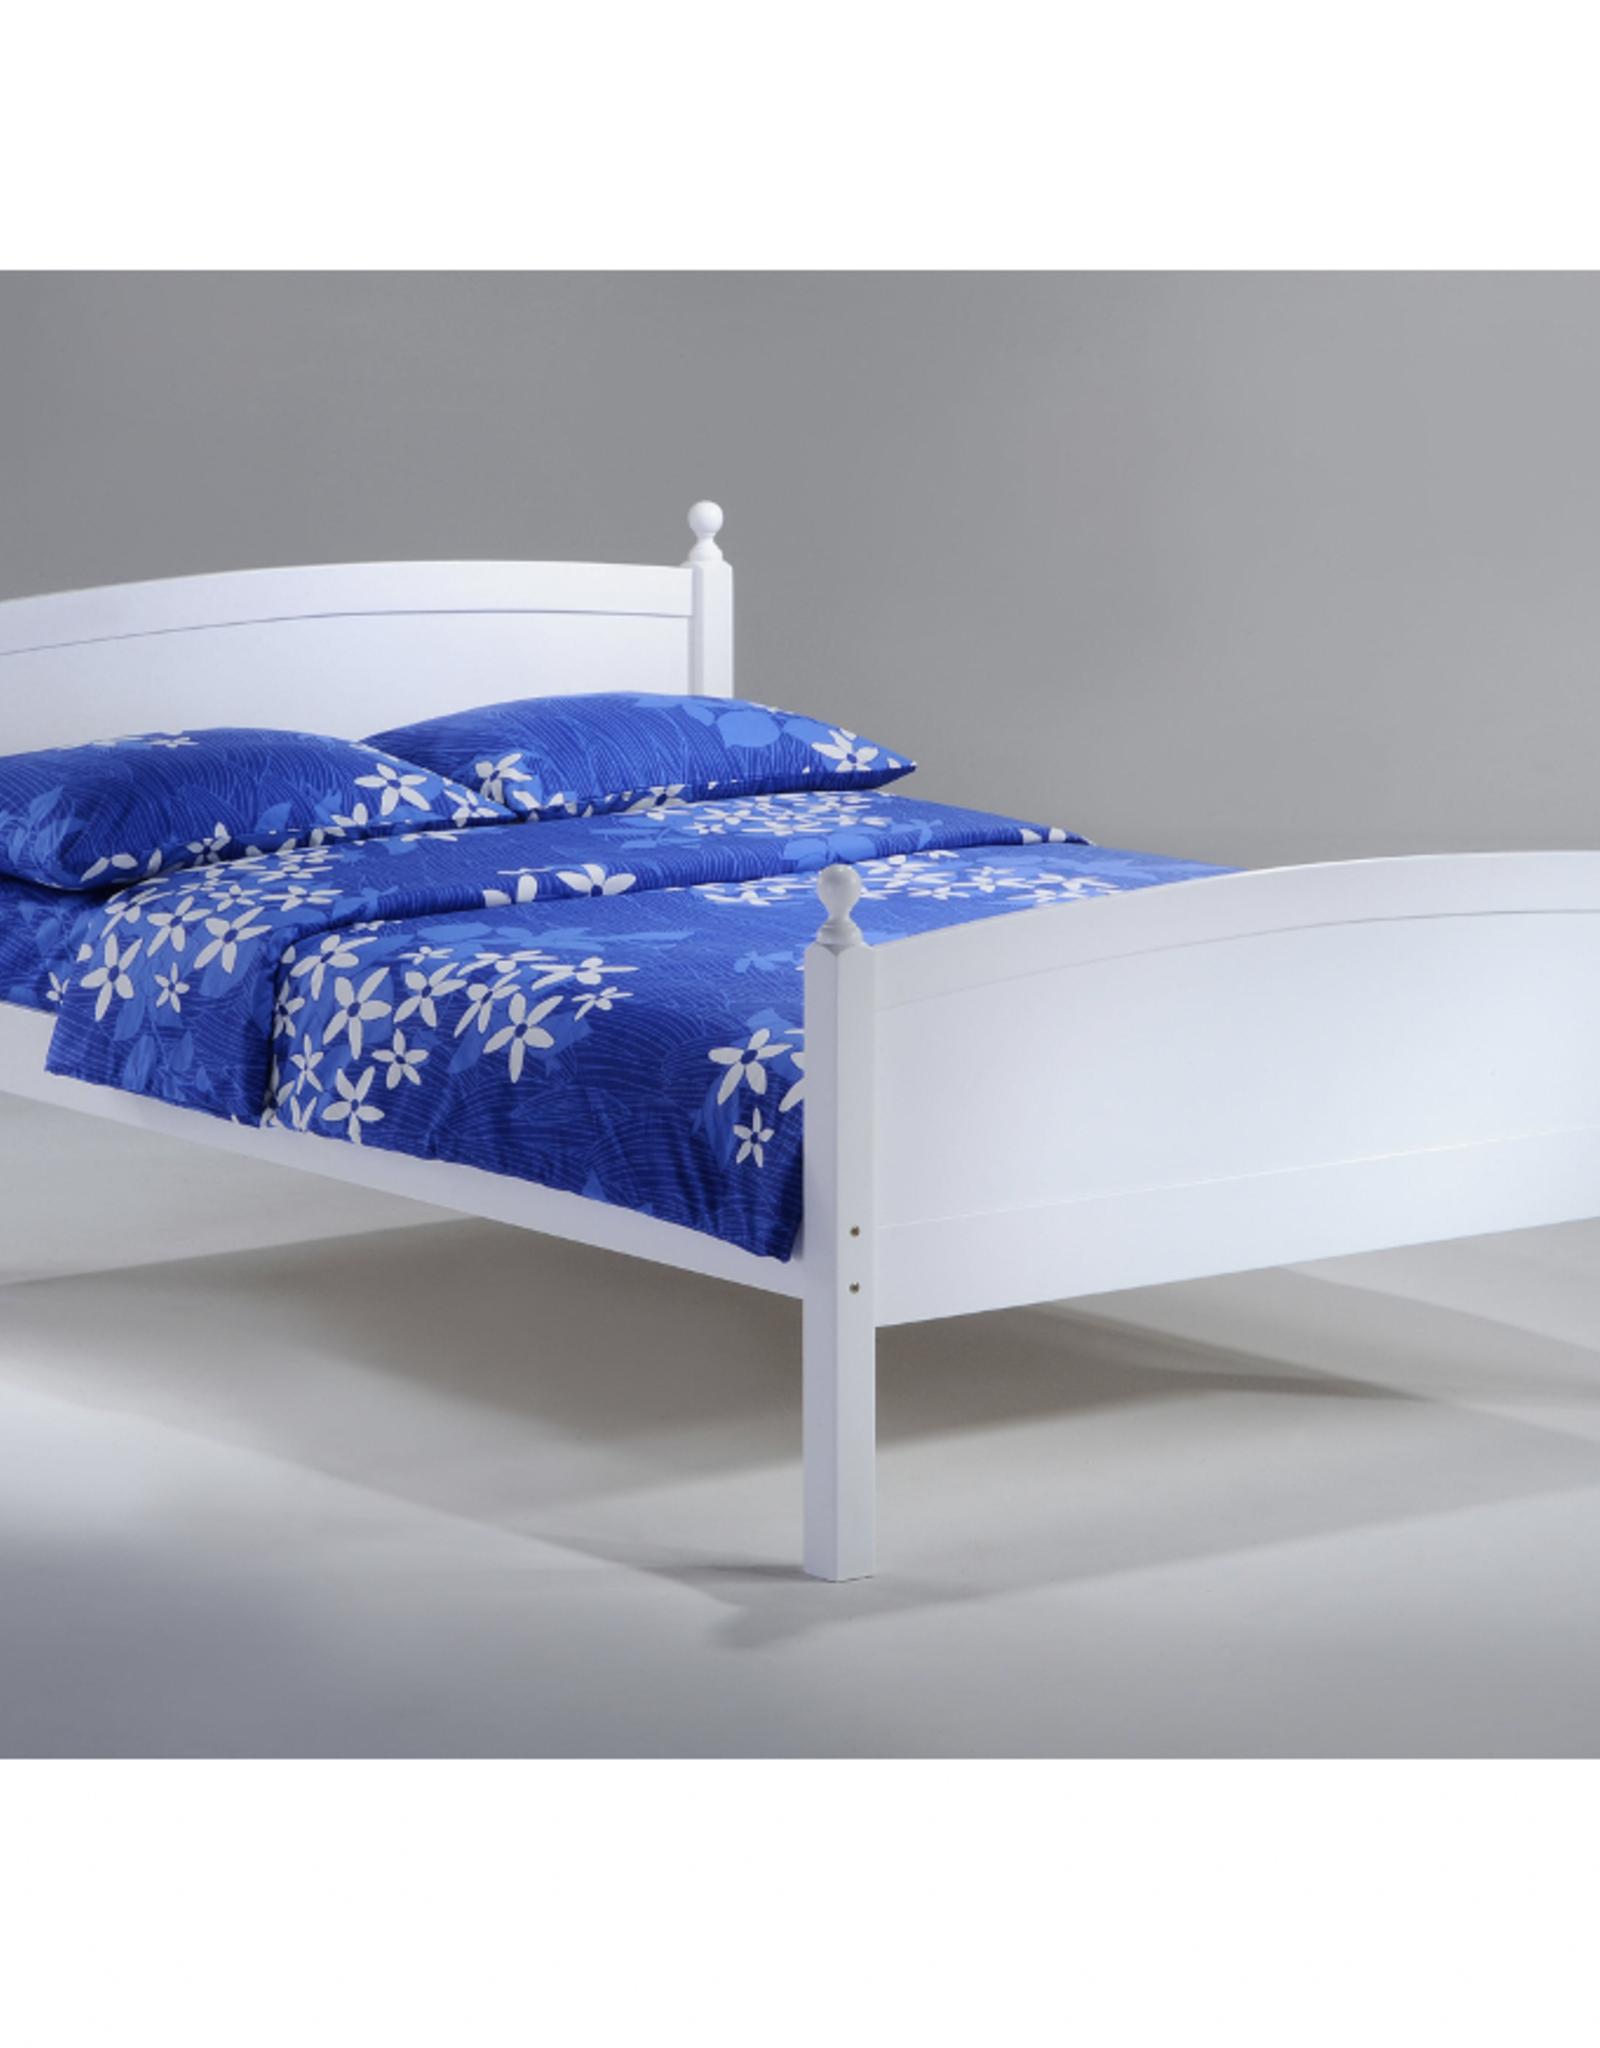 Licorice Platform Bed - Comes in Four Colors